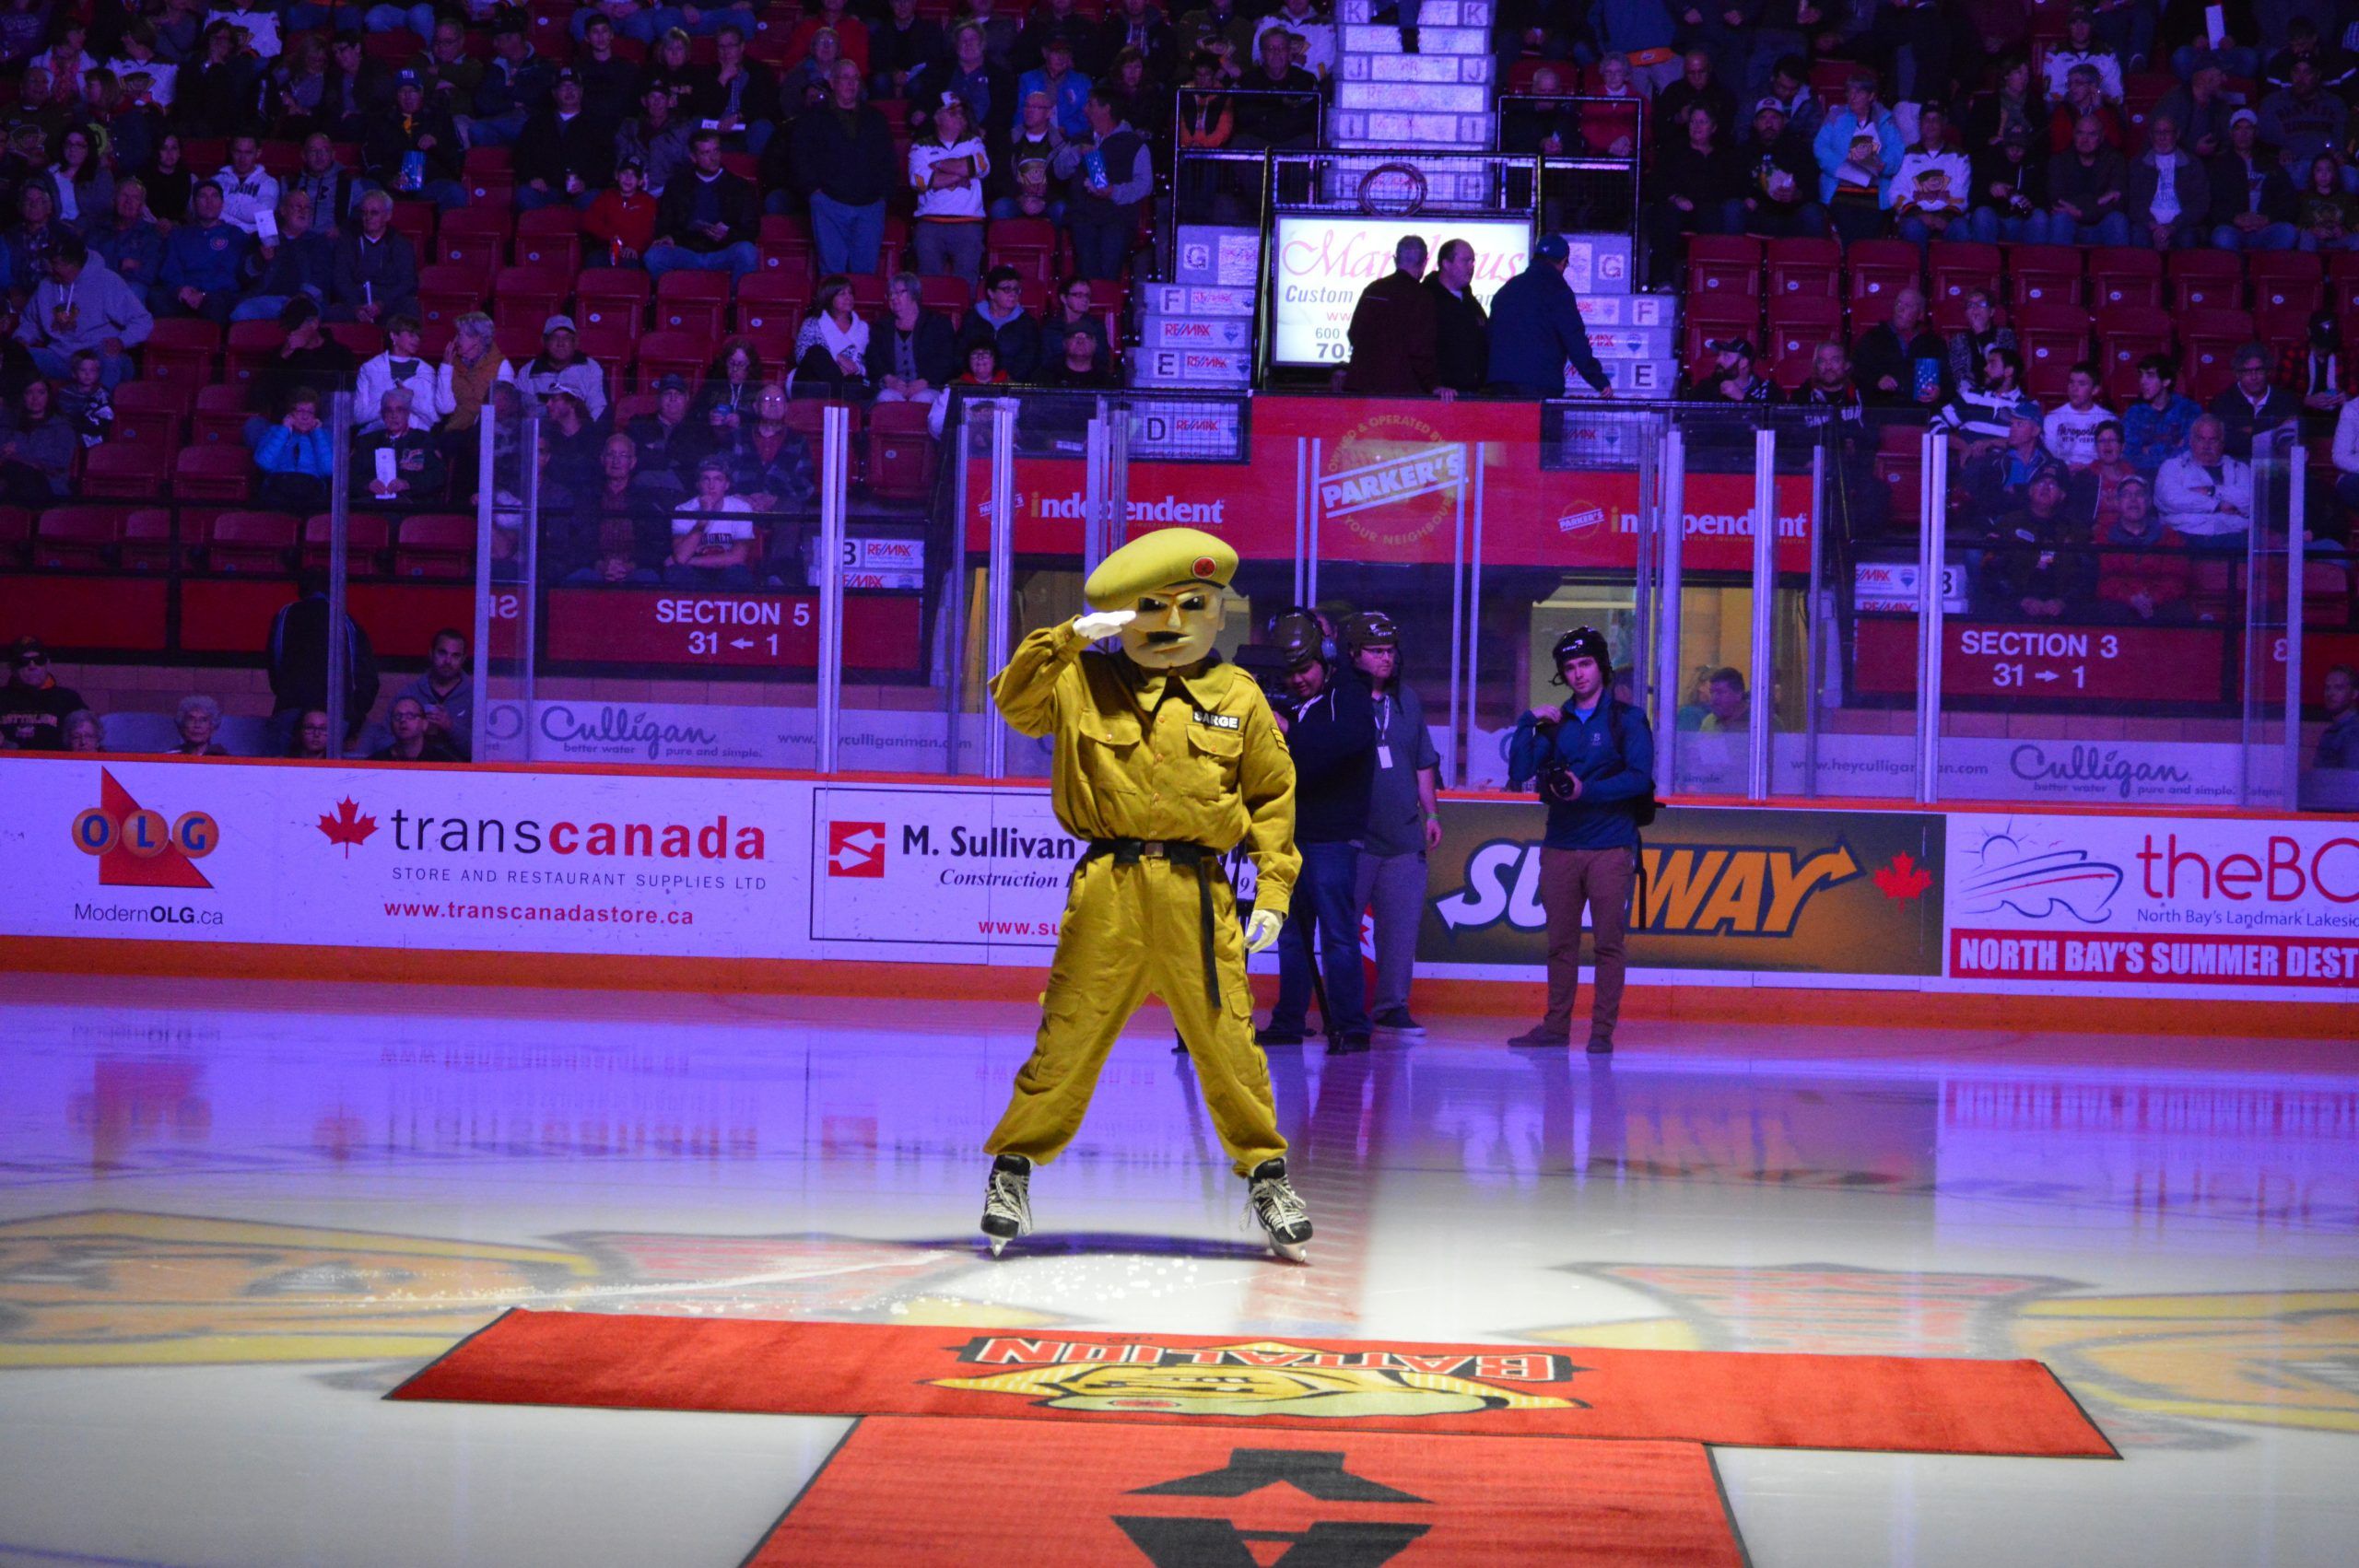 Team mascot Sarge. The Ontario Hockey League returns to North Bay